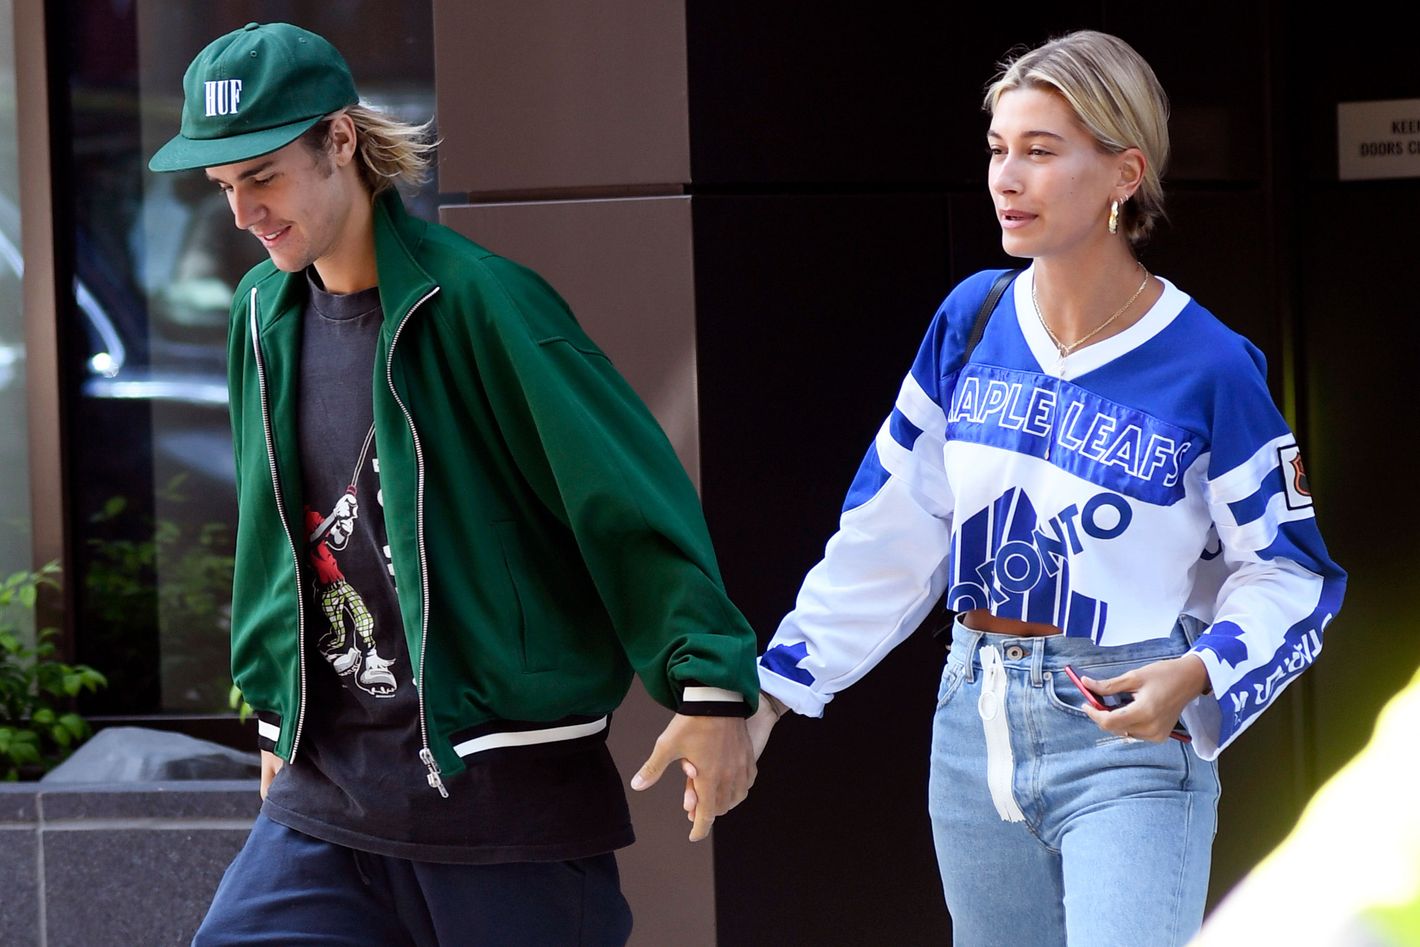 Justin Bieber and Hailey Baldwin Hold Hands in NYC